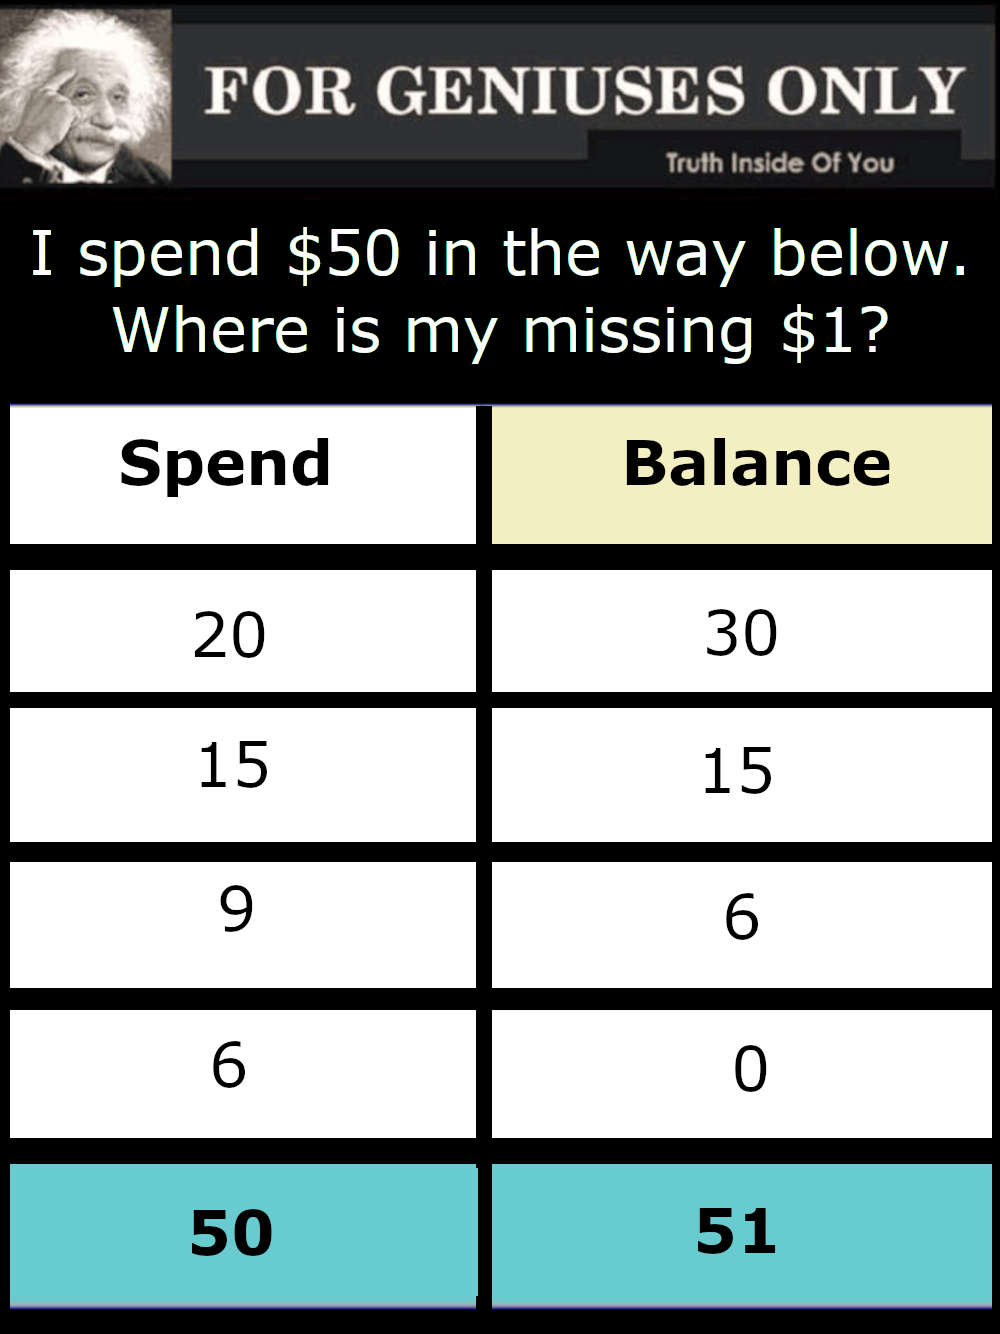 I spend $50 in the way below. Where is my missing $1? featured